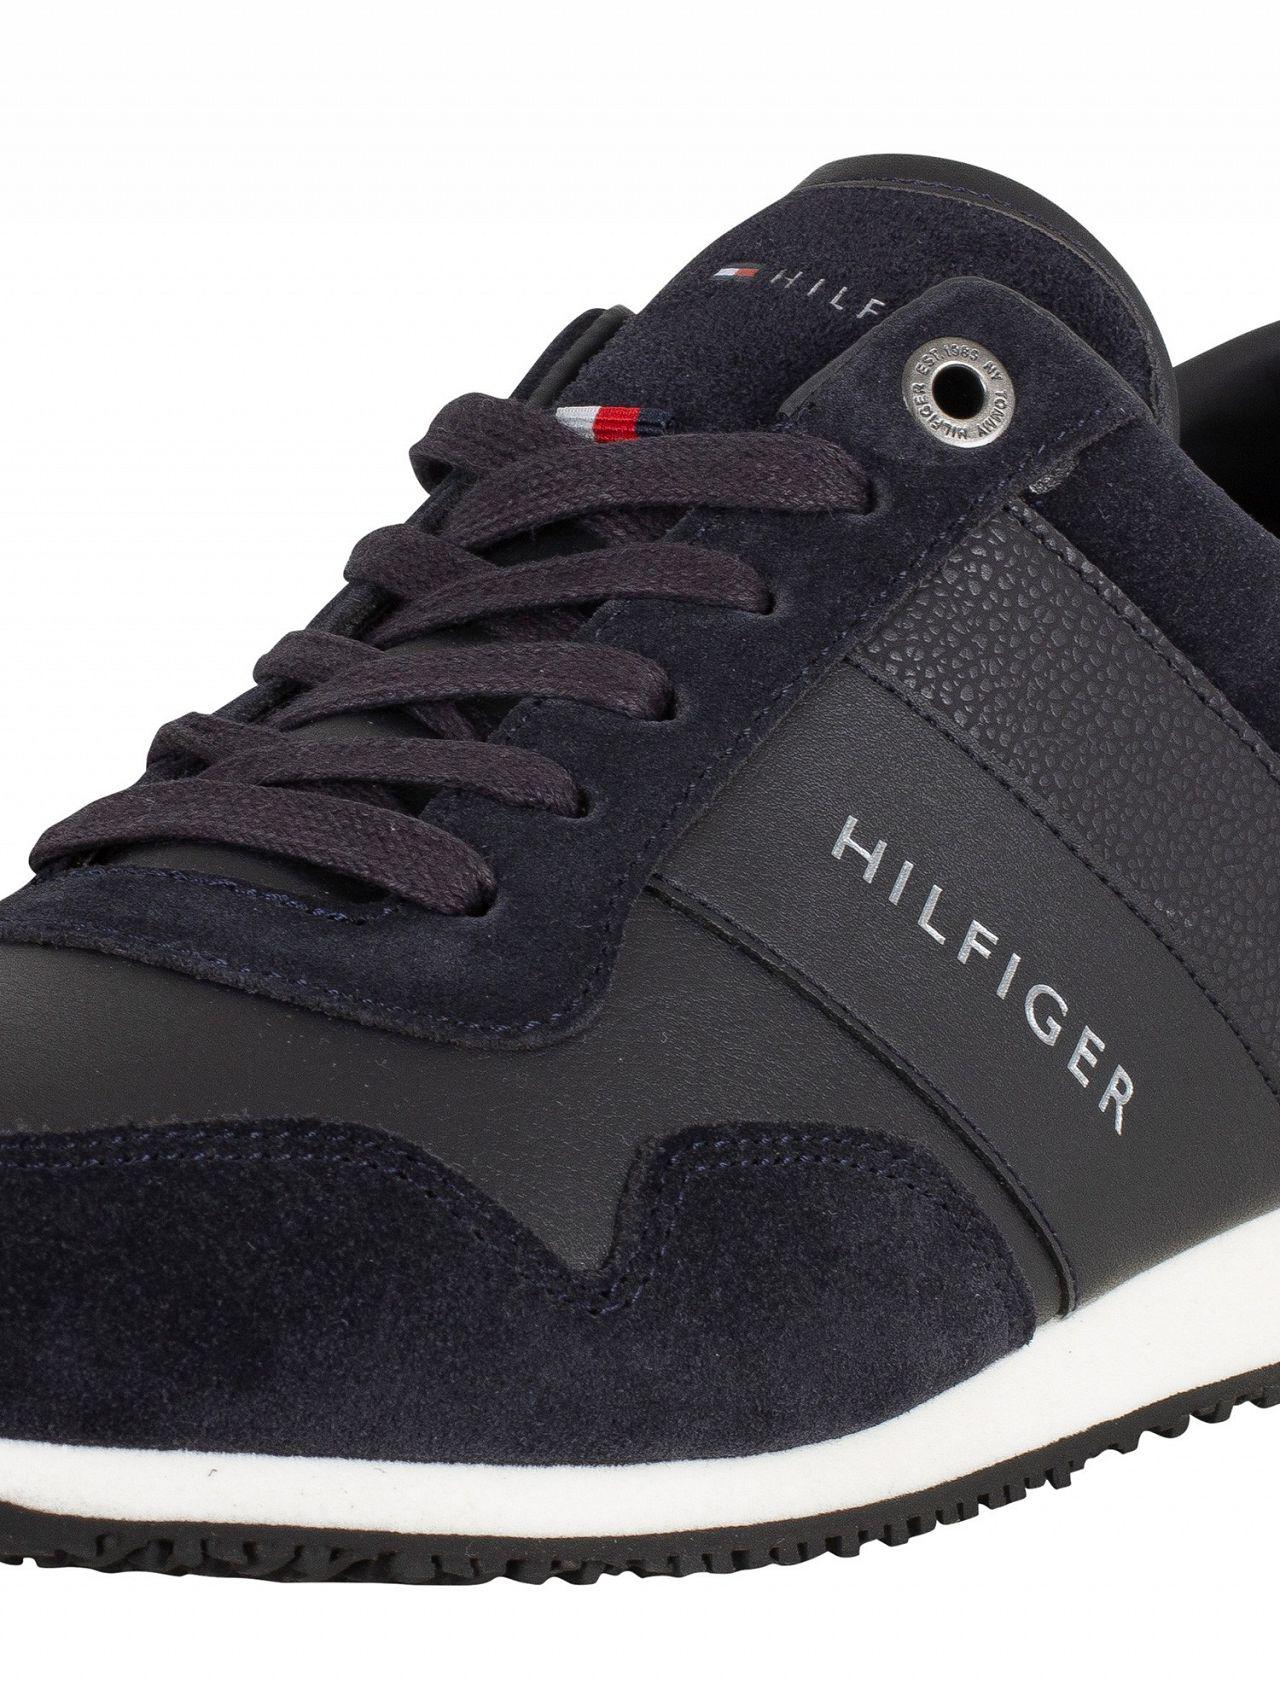 Tommy Hilfiger Men's Iconic Leather Suede Trainers, Blue Men's Shoes